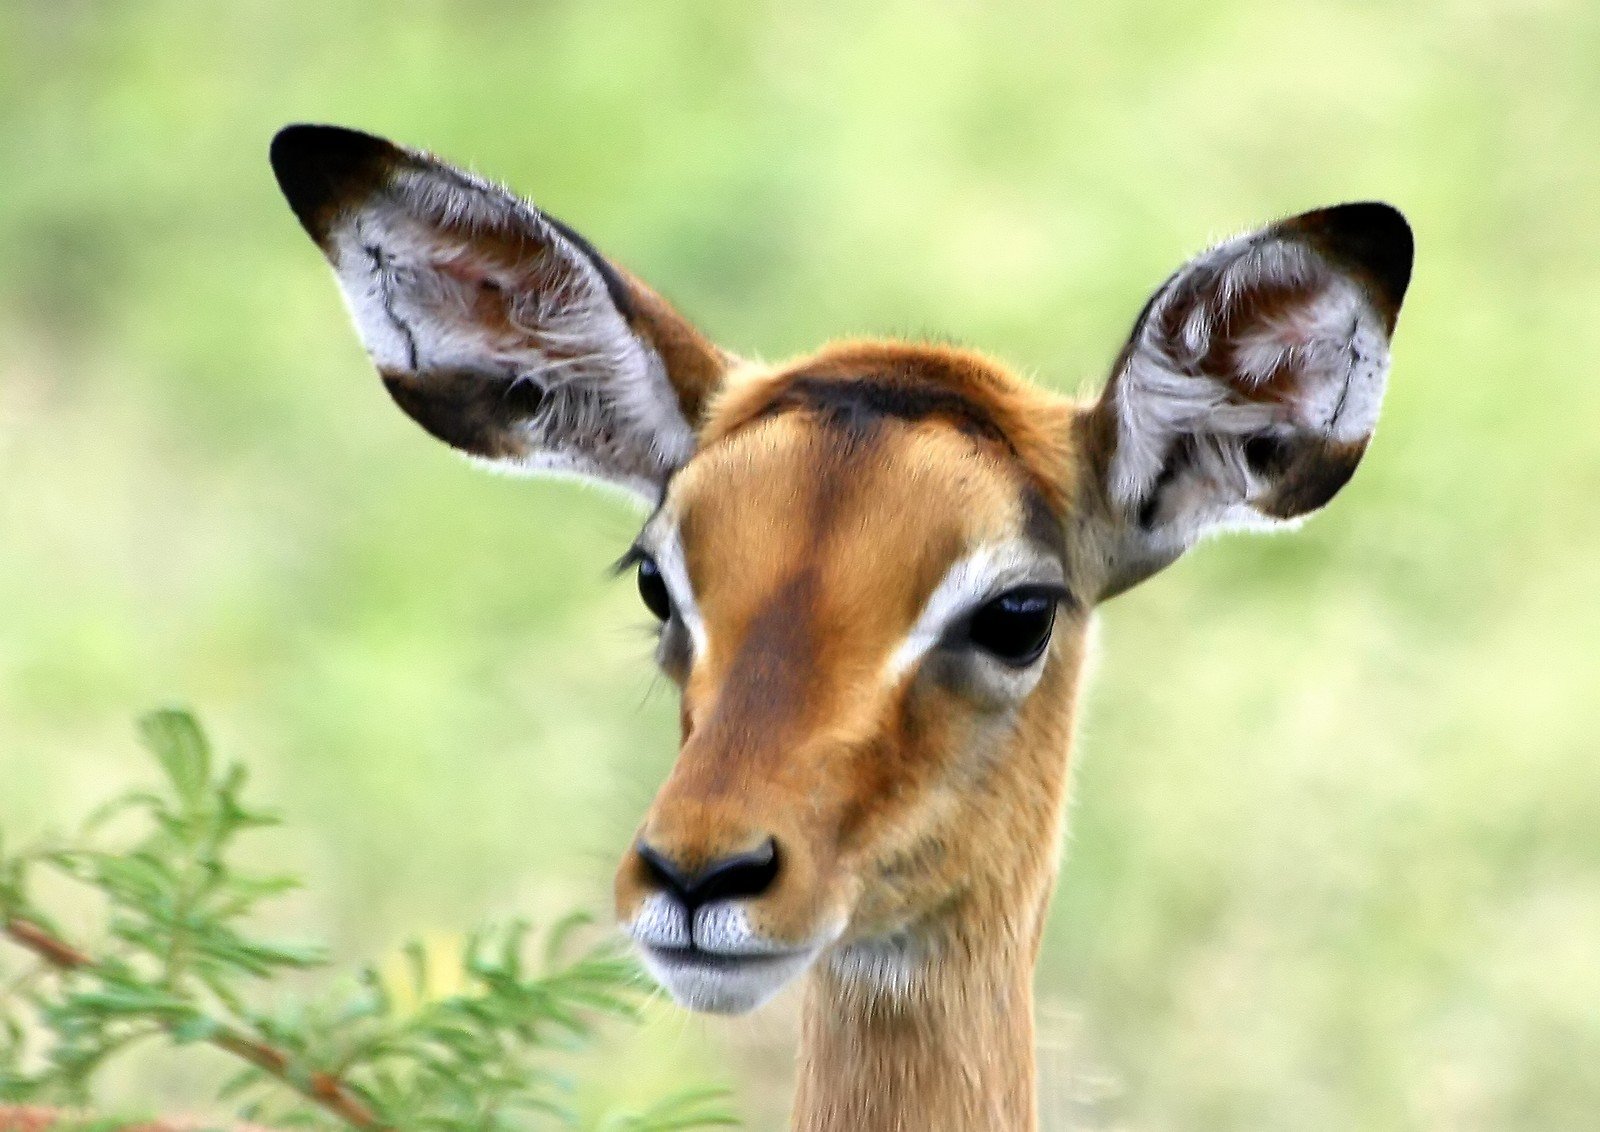 an image of a young gazelle with its eyes closed